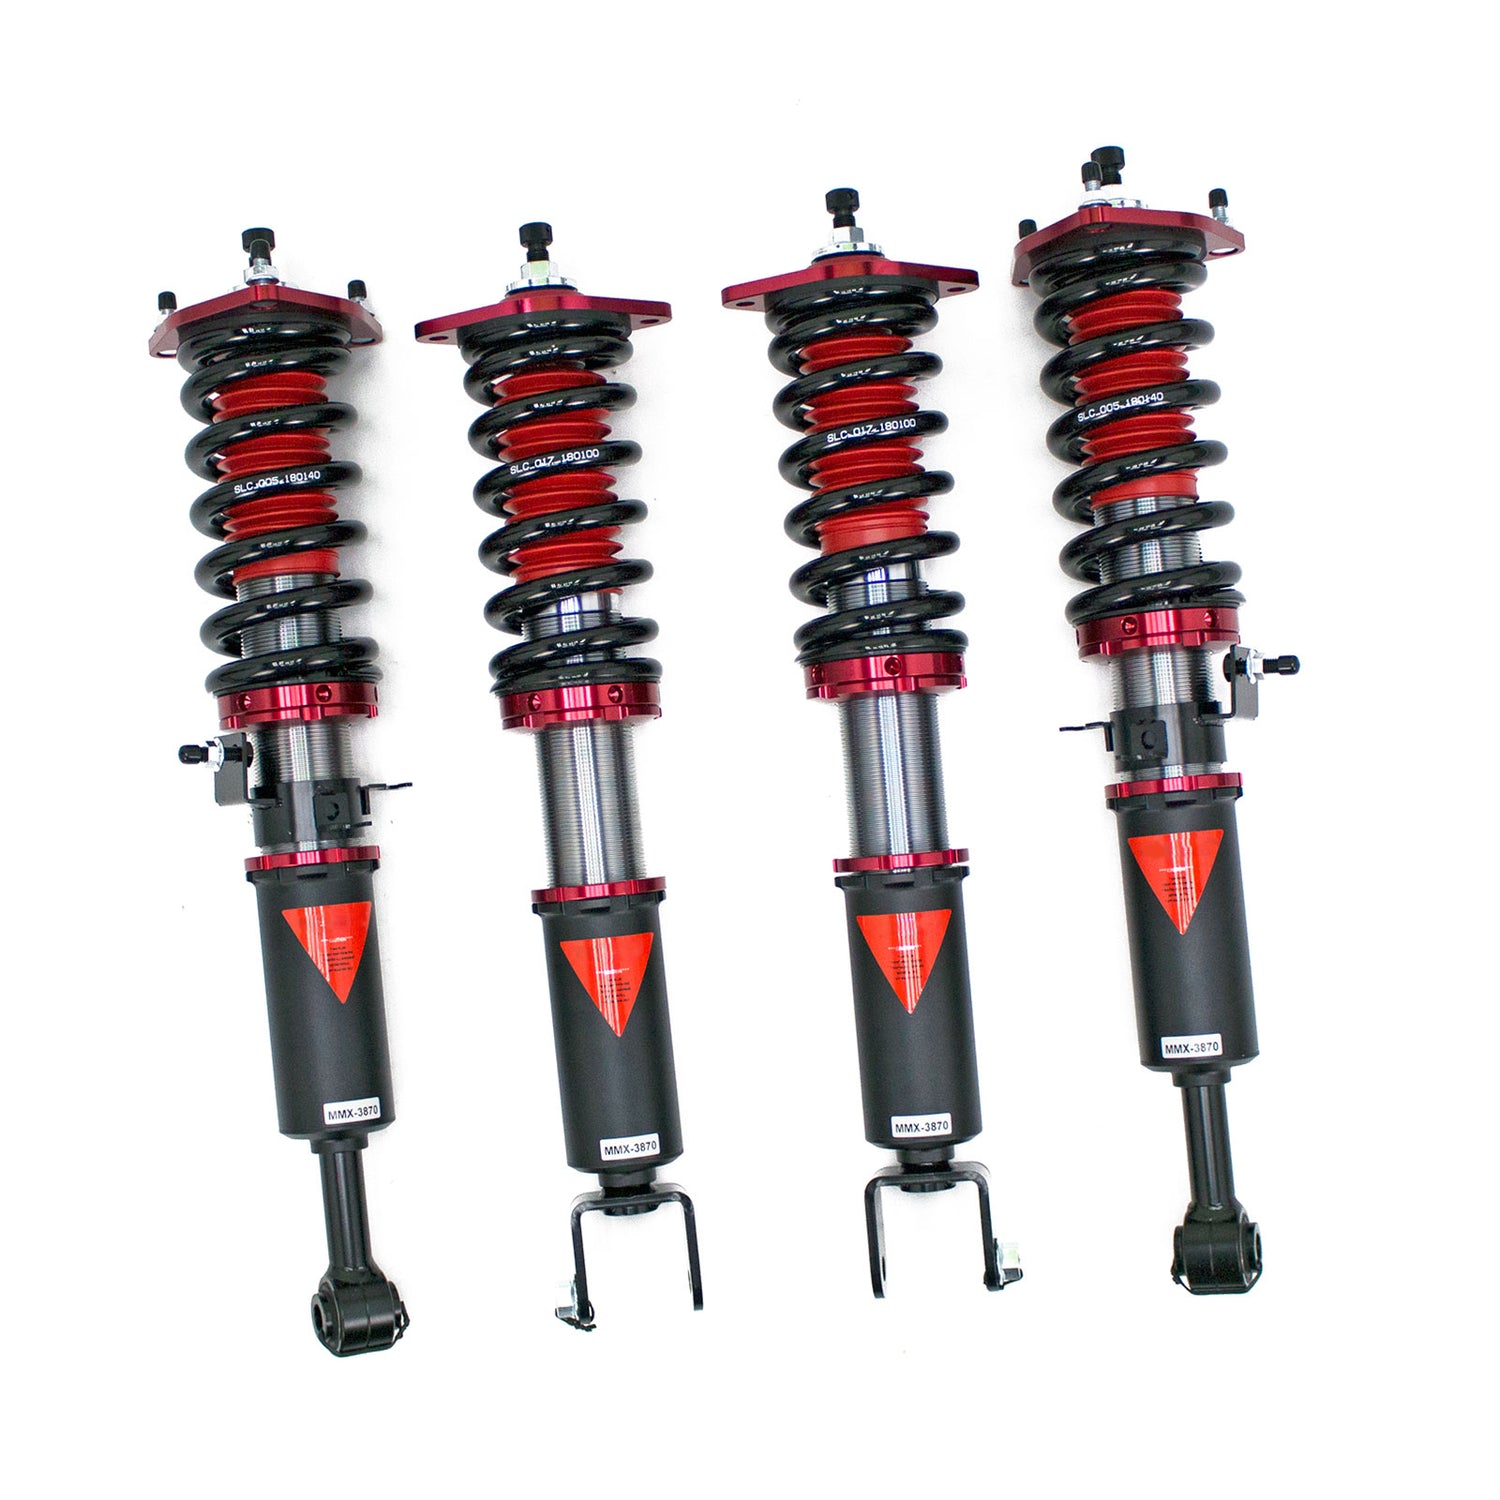 MMX3870-B MAXX Coilovers Lowering Kit, Fully Adjustable, Ride Height, 40 Clicks Rebound Settings, Infiniti G37(V36) Coupe/Sedan 2008-13(RWD)